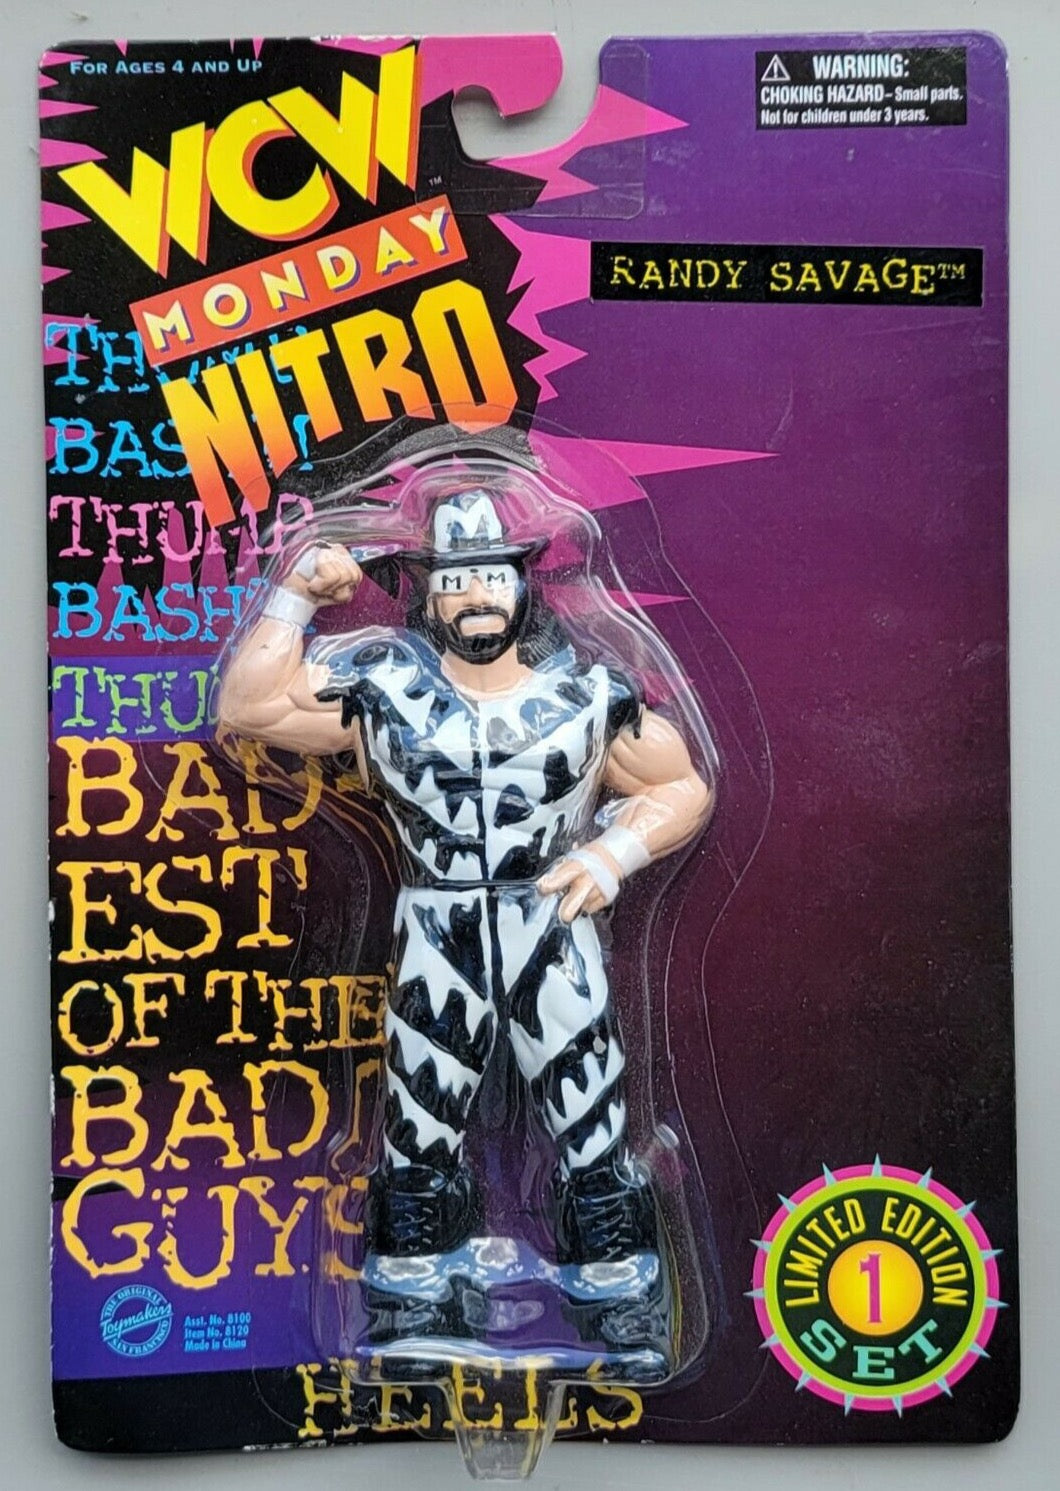 1997 WCW OSFTM Collectible Wrestlers [LJN Style] Limited Edition Set 1 "Heels" Randy Savage